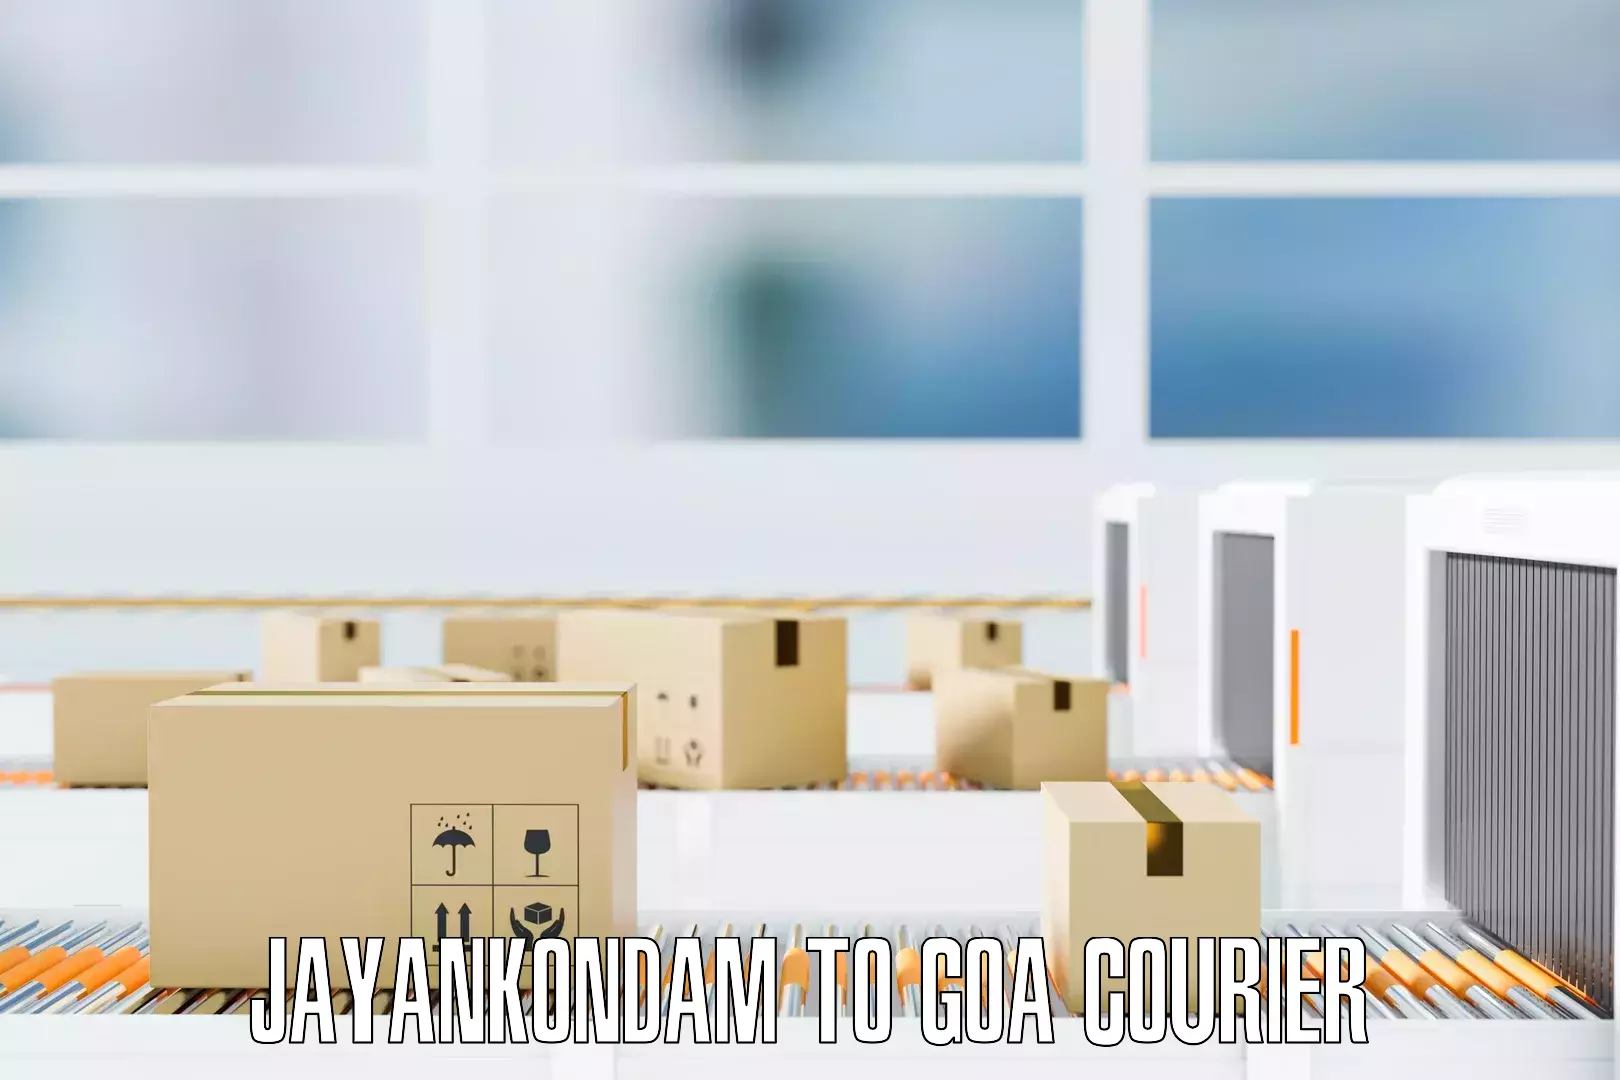 Full home relocation services Jayankondam to South Goa